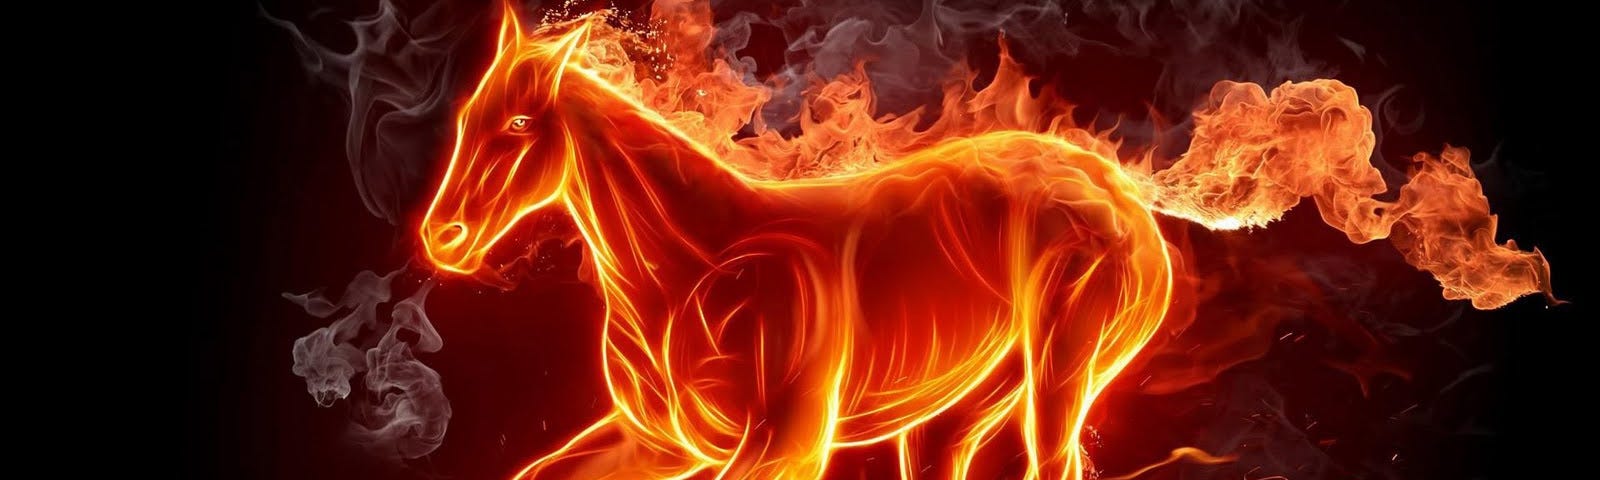 fire outlined horse against a black background with flaming tail